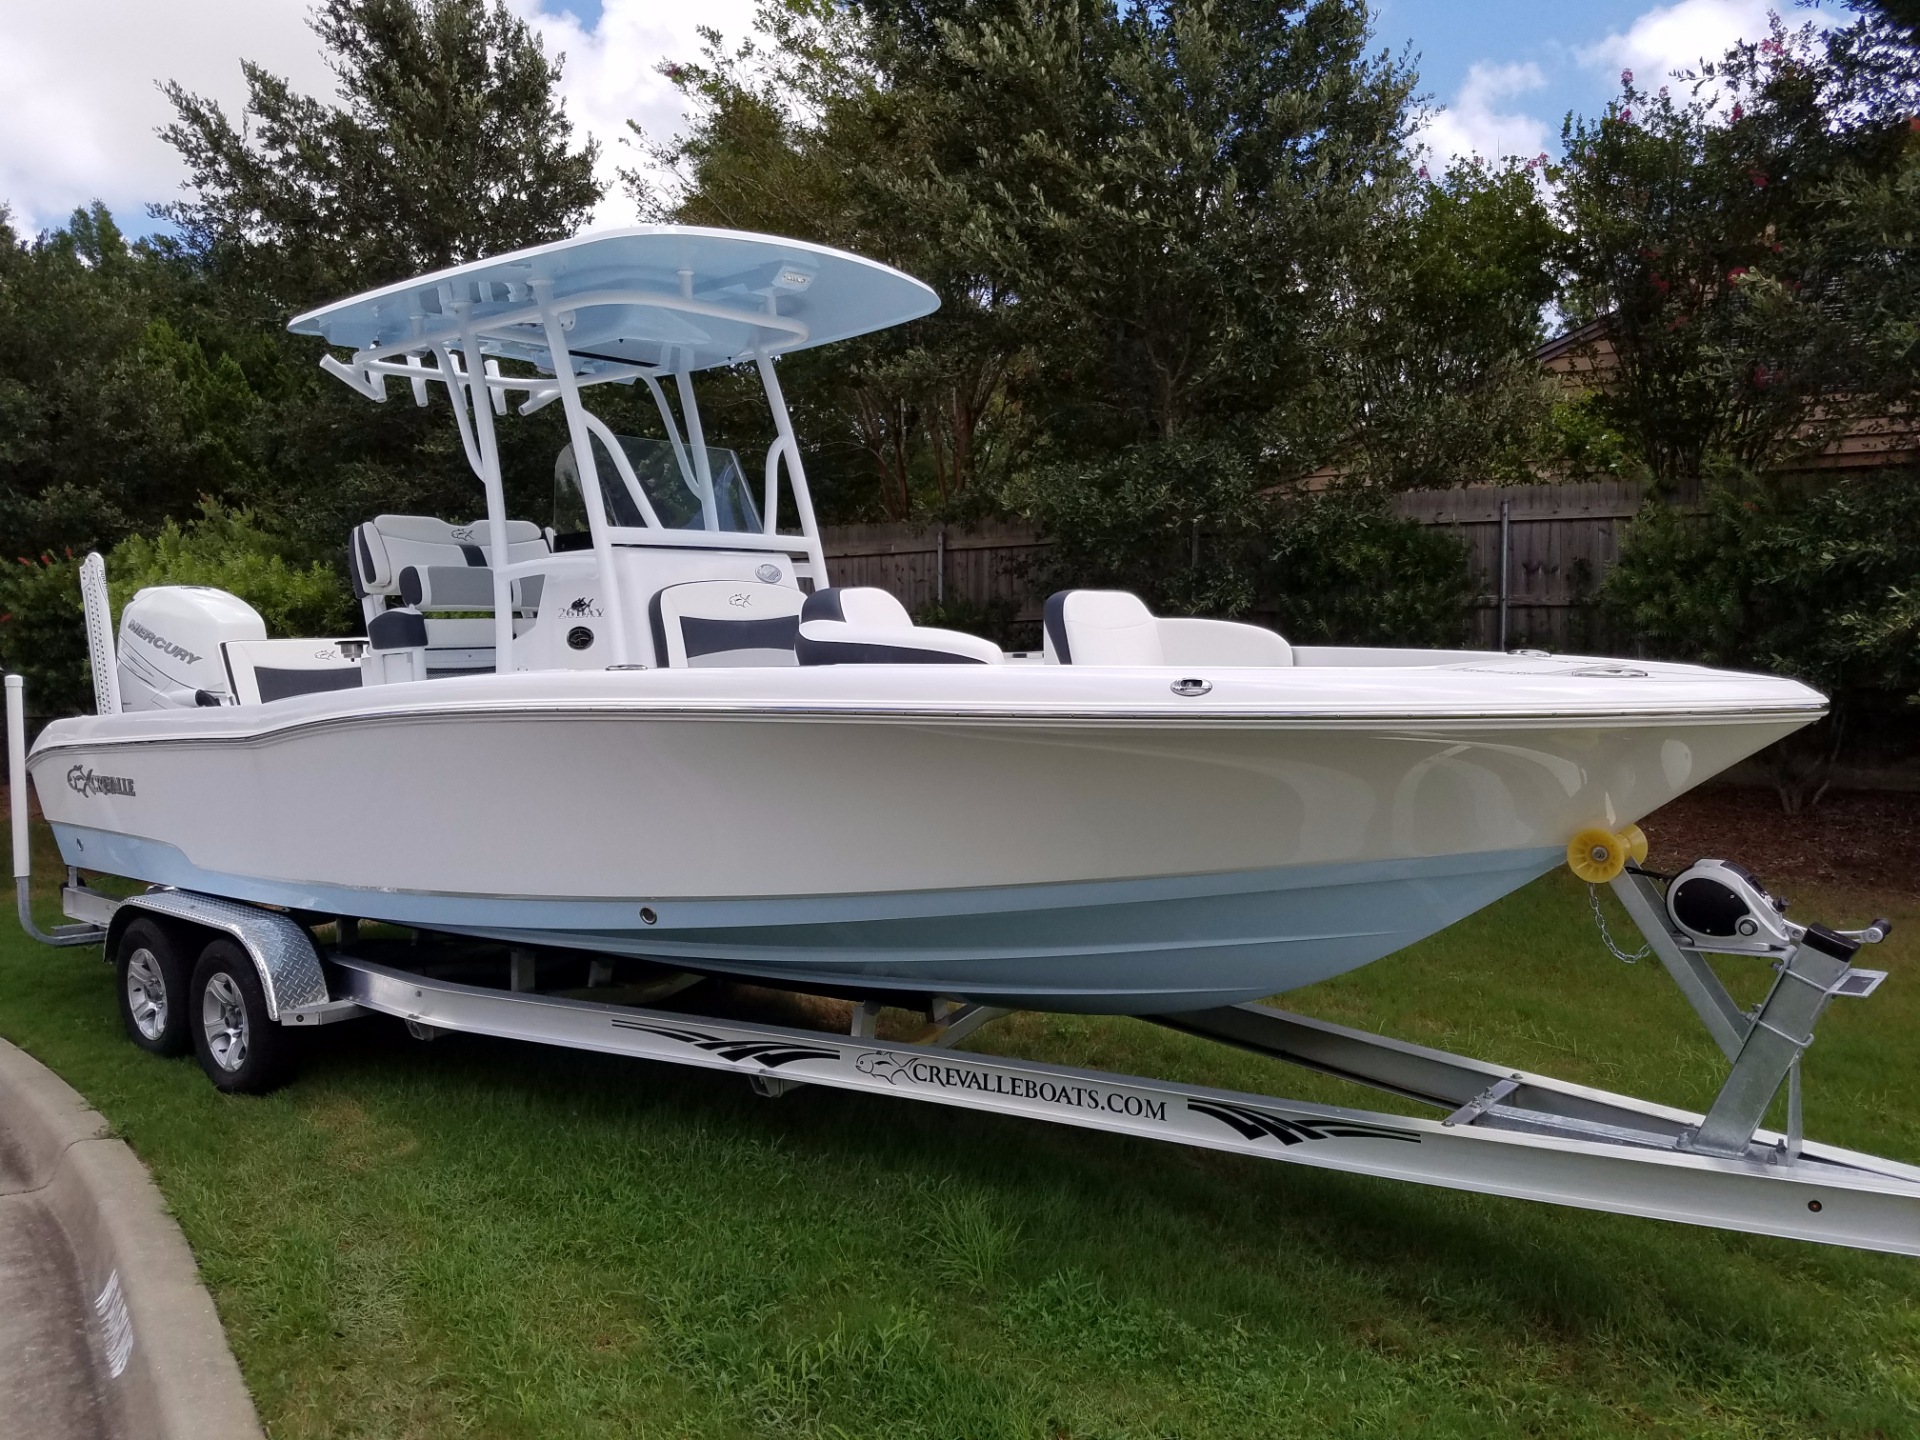 Boat Review: 2017 Crevalle 26 Bay Boat - DestinFishing.com: Your ...